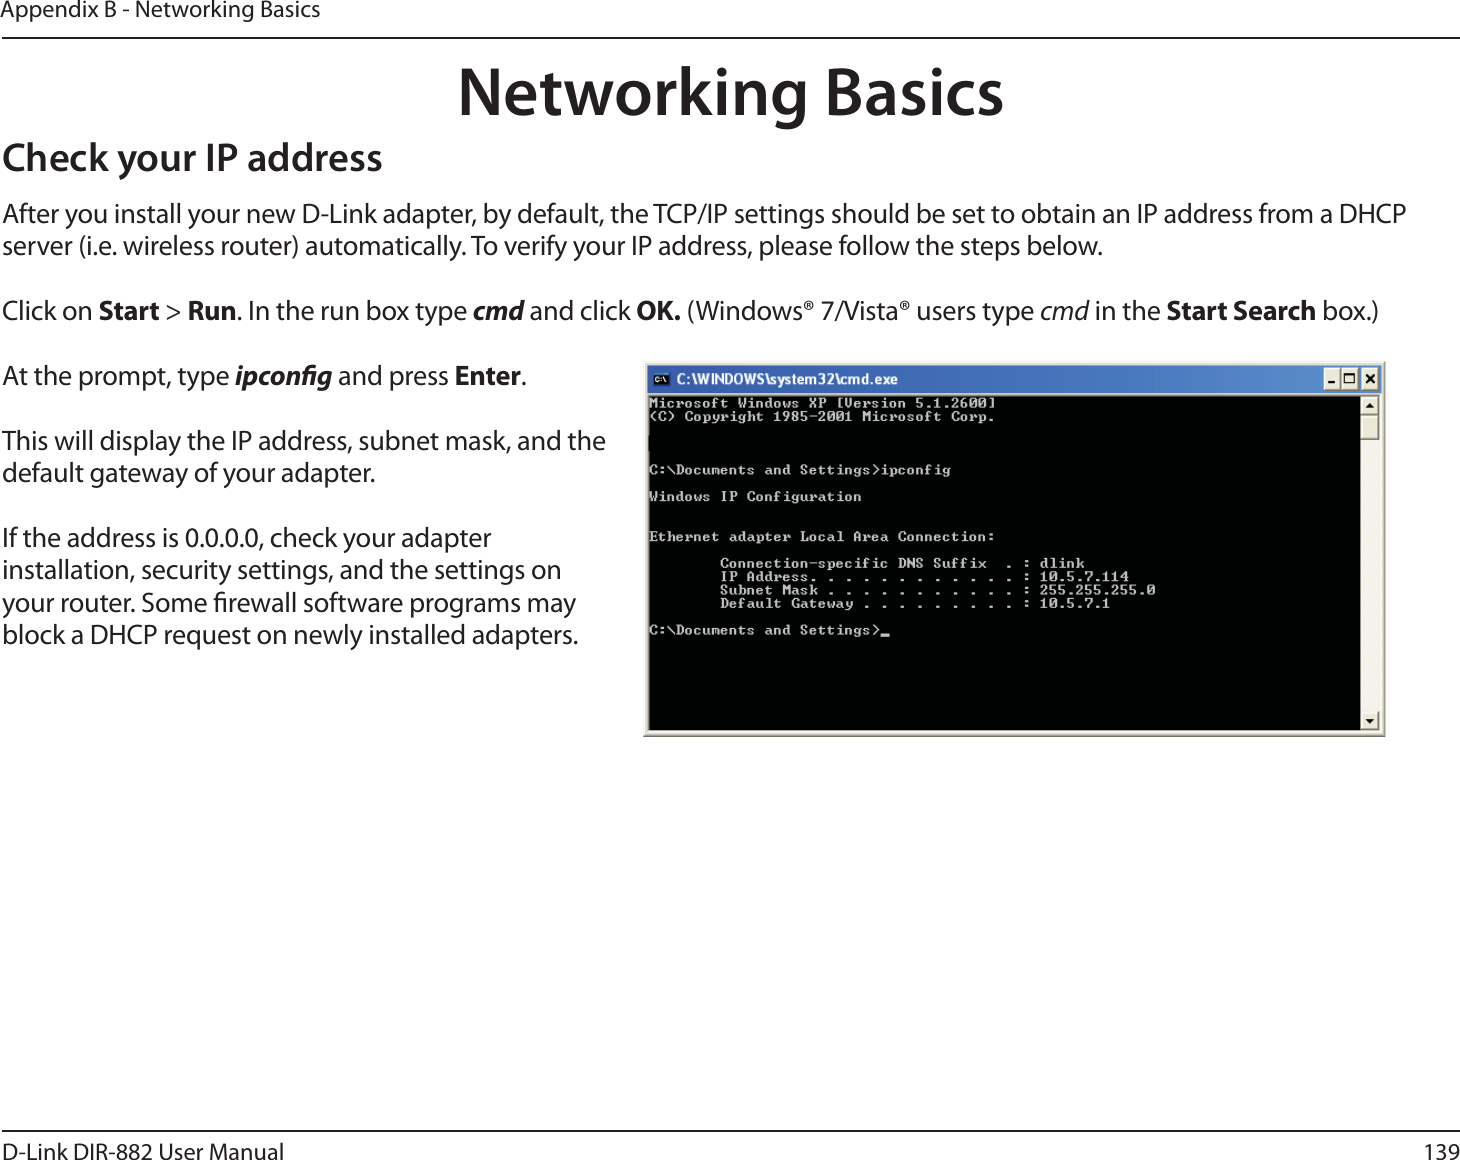 139D-Link DIR-882 User ManualAppendix B - Networking BasicsNetworking BasicsCheck your IP addressAfter you install your new D-Link adapter, by default, the TCP/IP settings should be set to obtain an IP address from a DHCP server (i.e. wireless router) automatically. To verify your IP address, please follow the steps below.Click on Start &gt; Run. In the run box type cmd and click OK. (Windows® 7/Vista® users type cmd in the Start Search box.)At the prompt, type ipcong and press &amp;OUFS.This will display the IP address, subnet mask, and the default gateway of your adapter.If the address is 0.0.0.0, check your adapter installation, security settings, and the settings on your router. Some rewall software programs may block a DHCP request on newly installed adapters. 